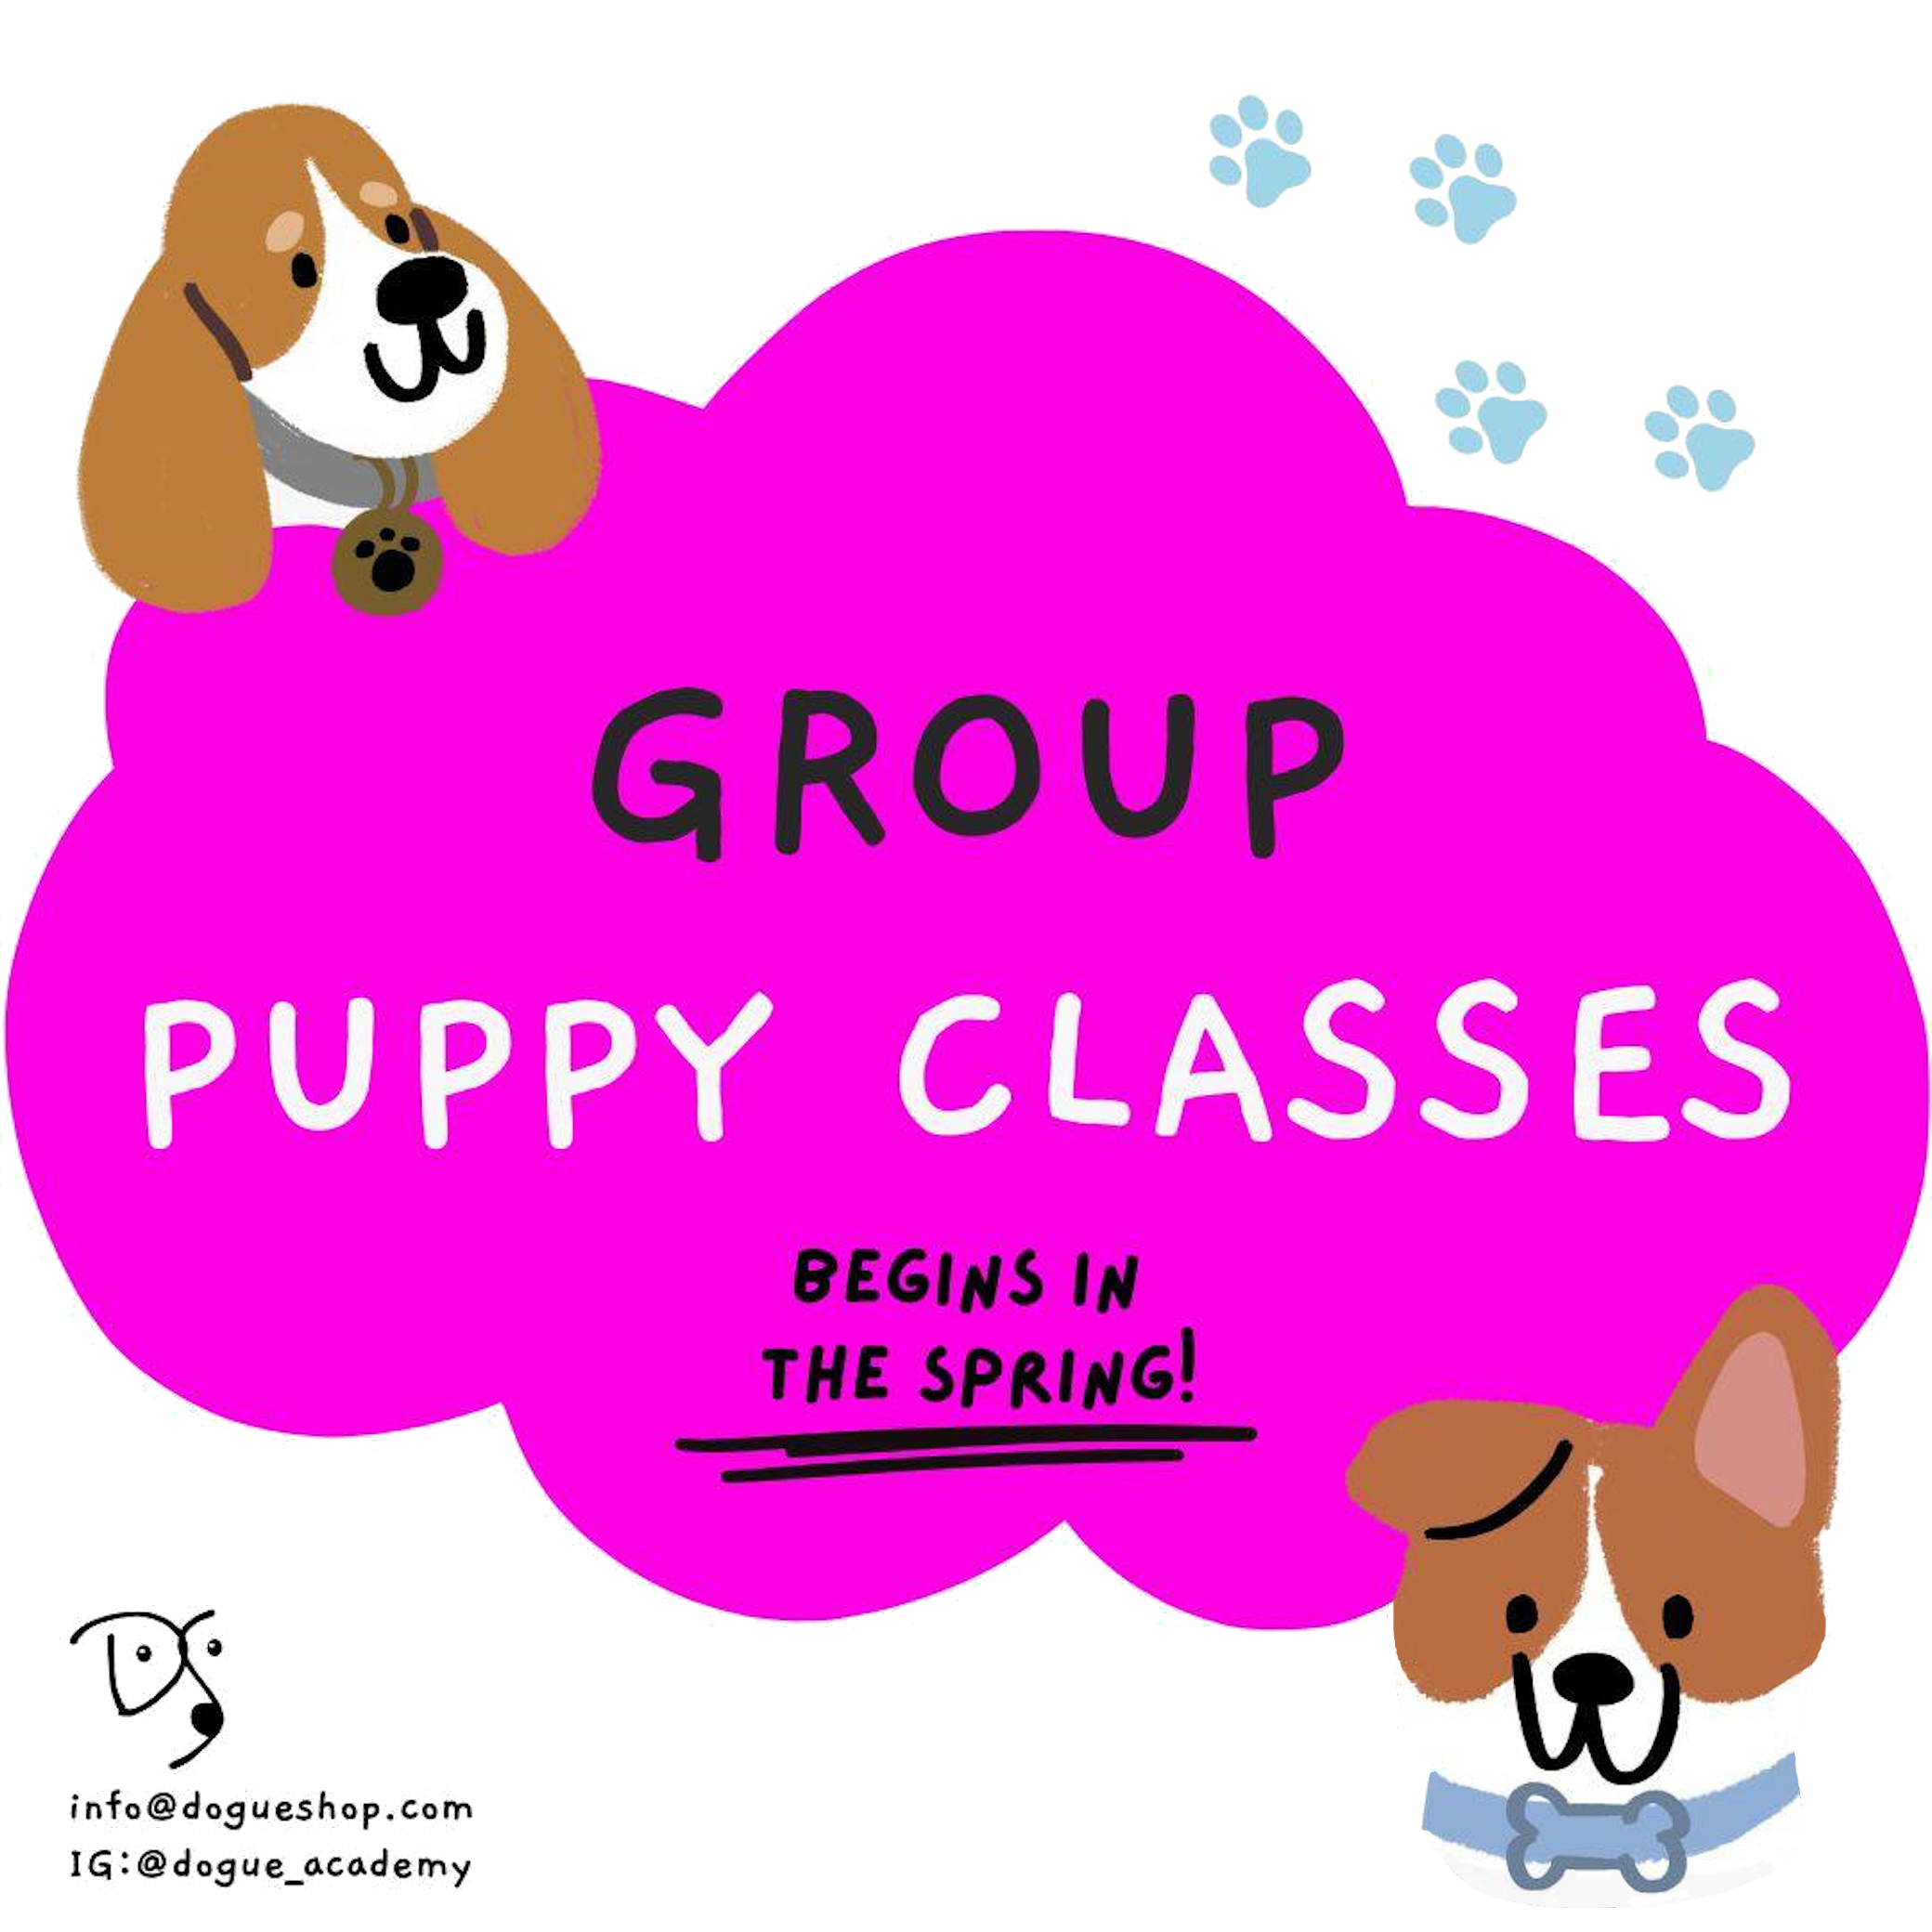 Puppy group class image